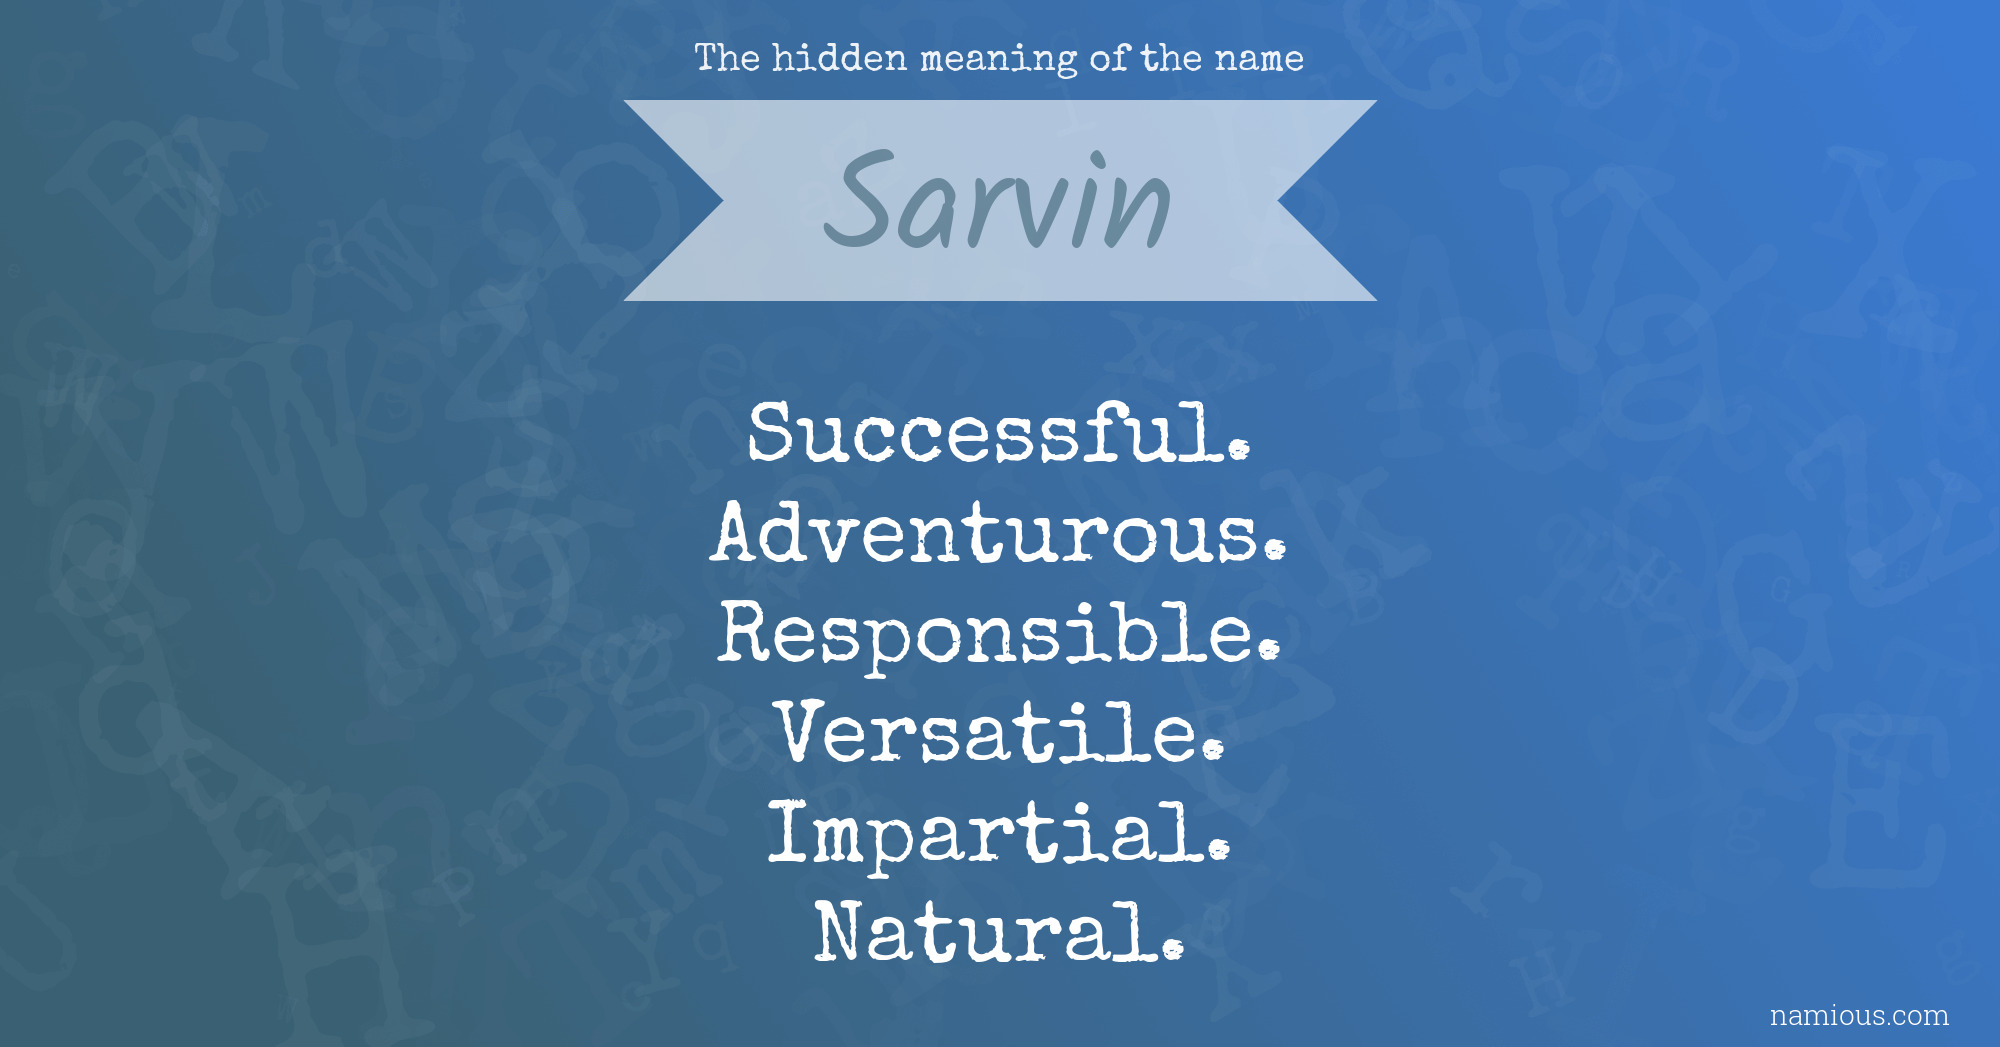 The hidden meaning of the name Sarvin